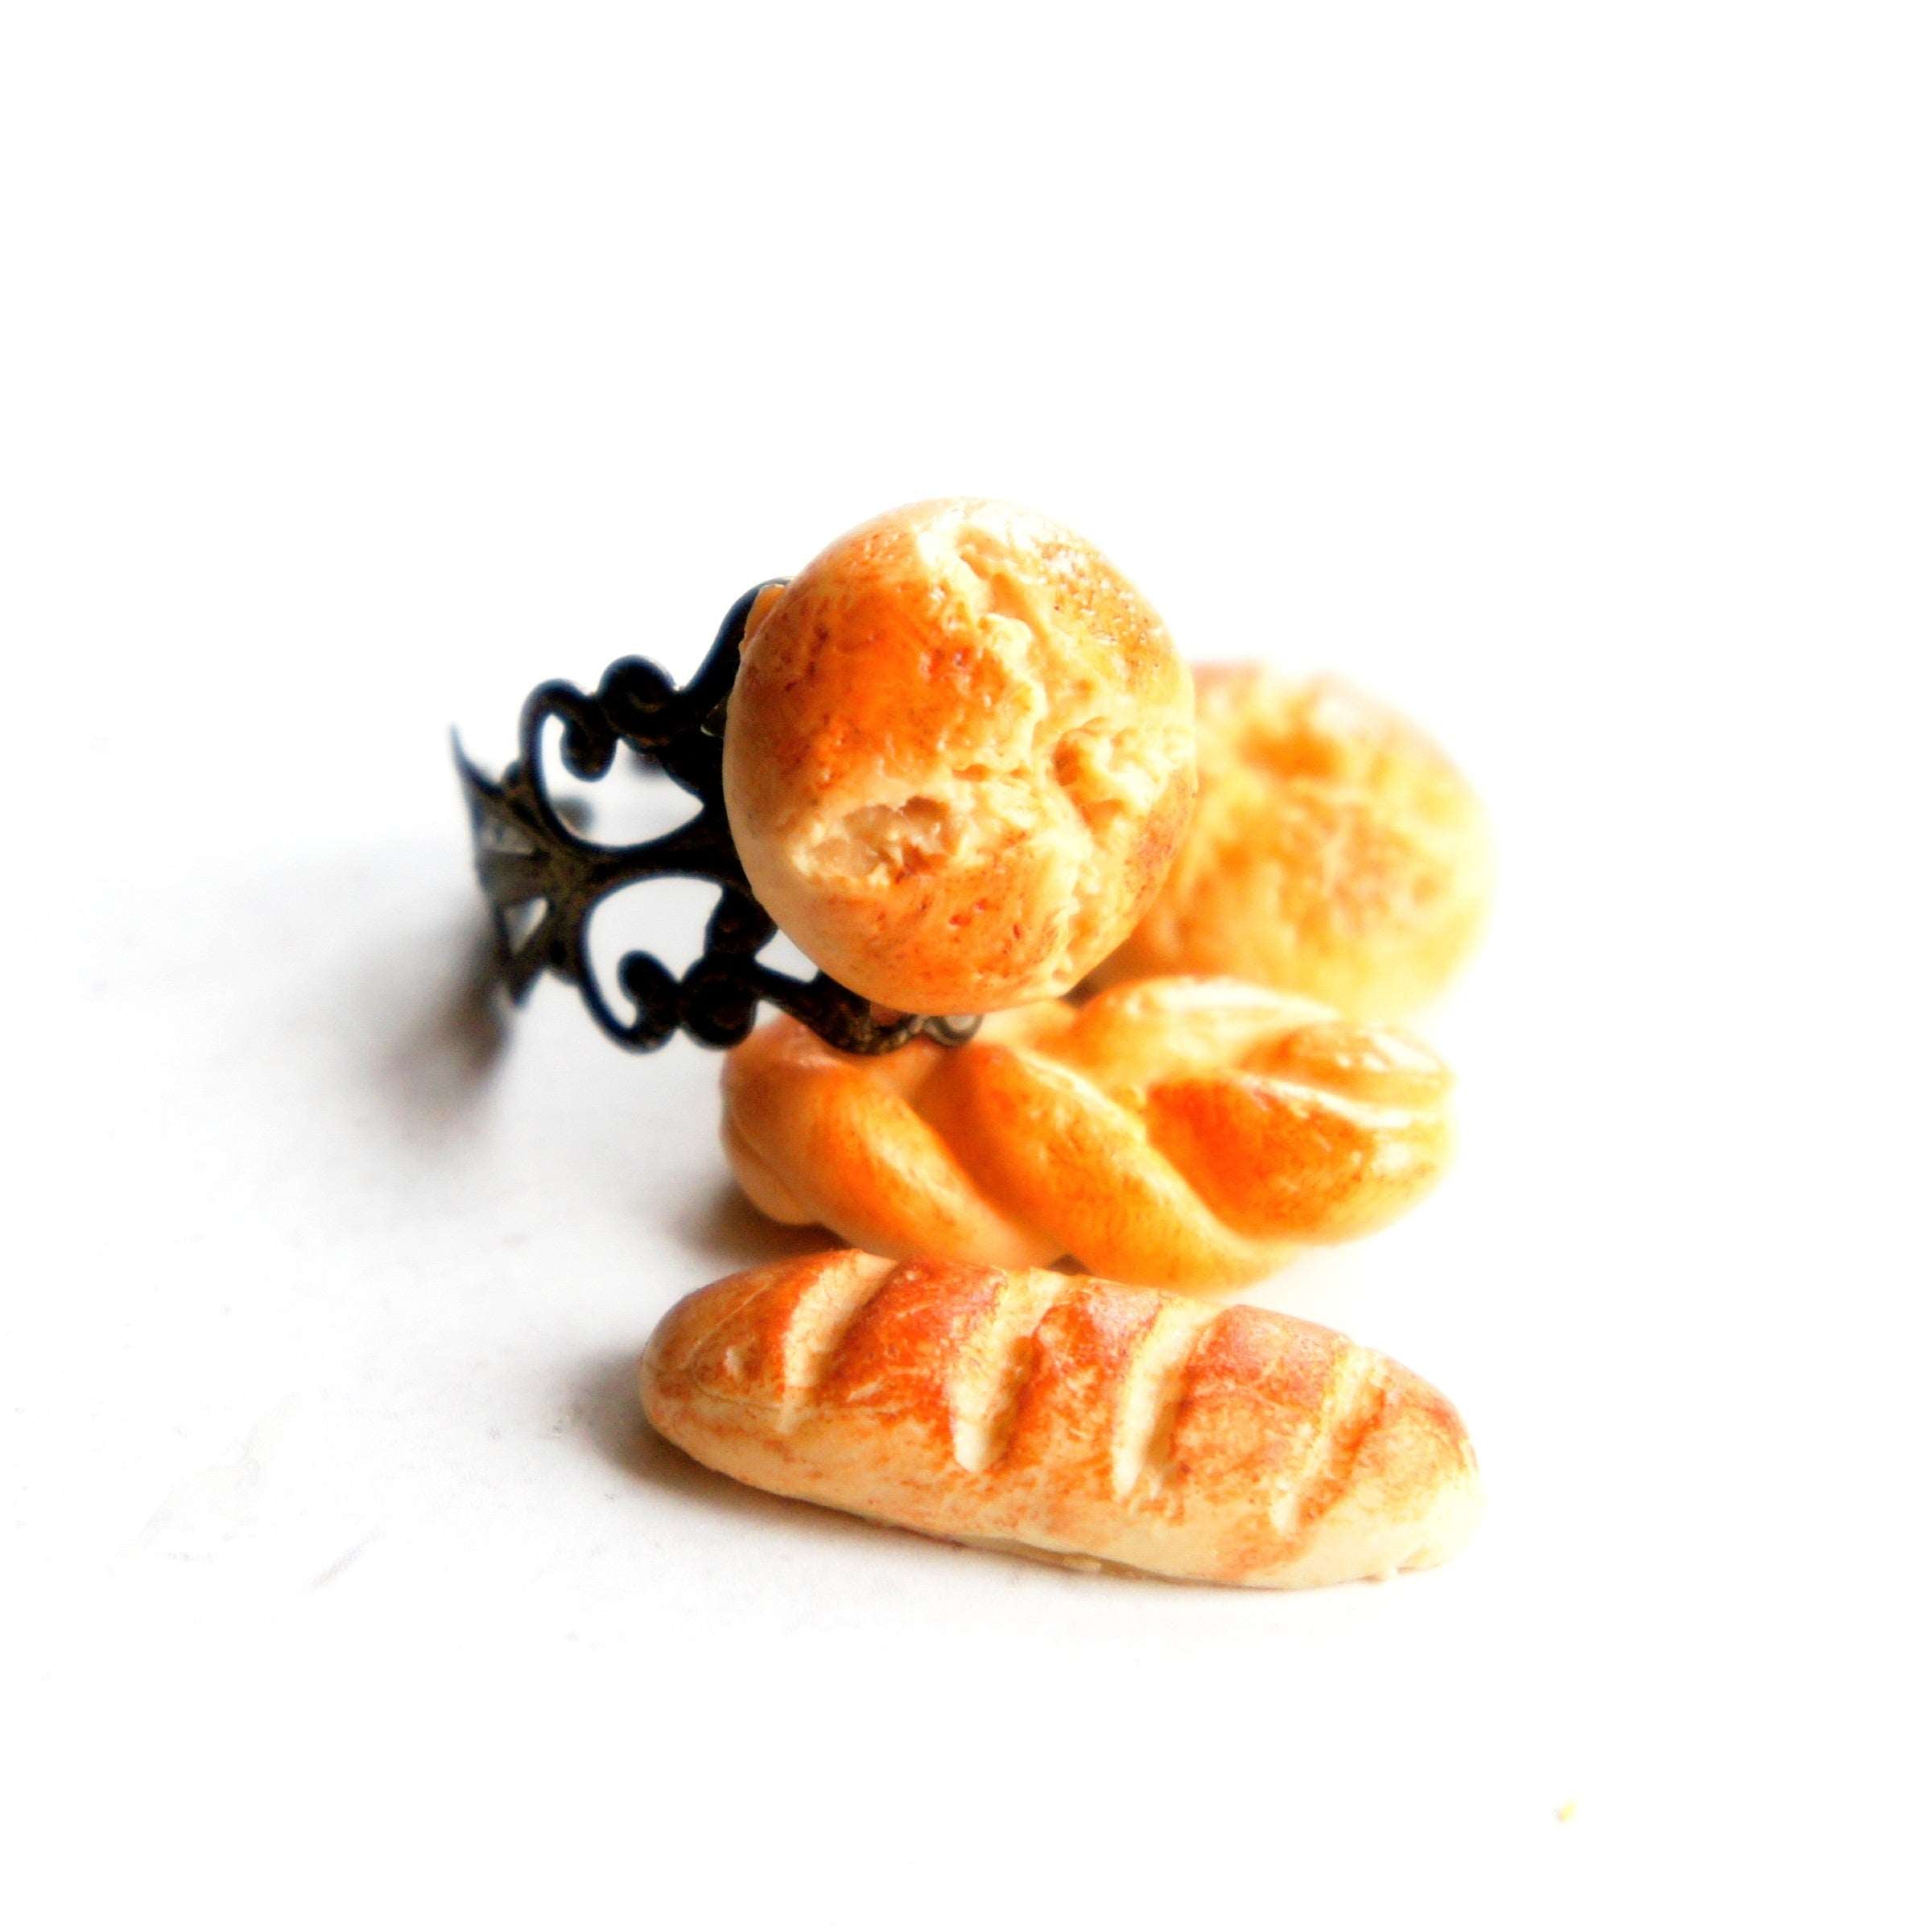 Bread Ring - Jillicious charms and accessories